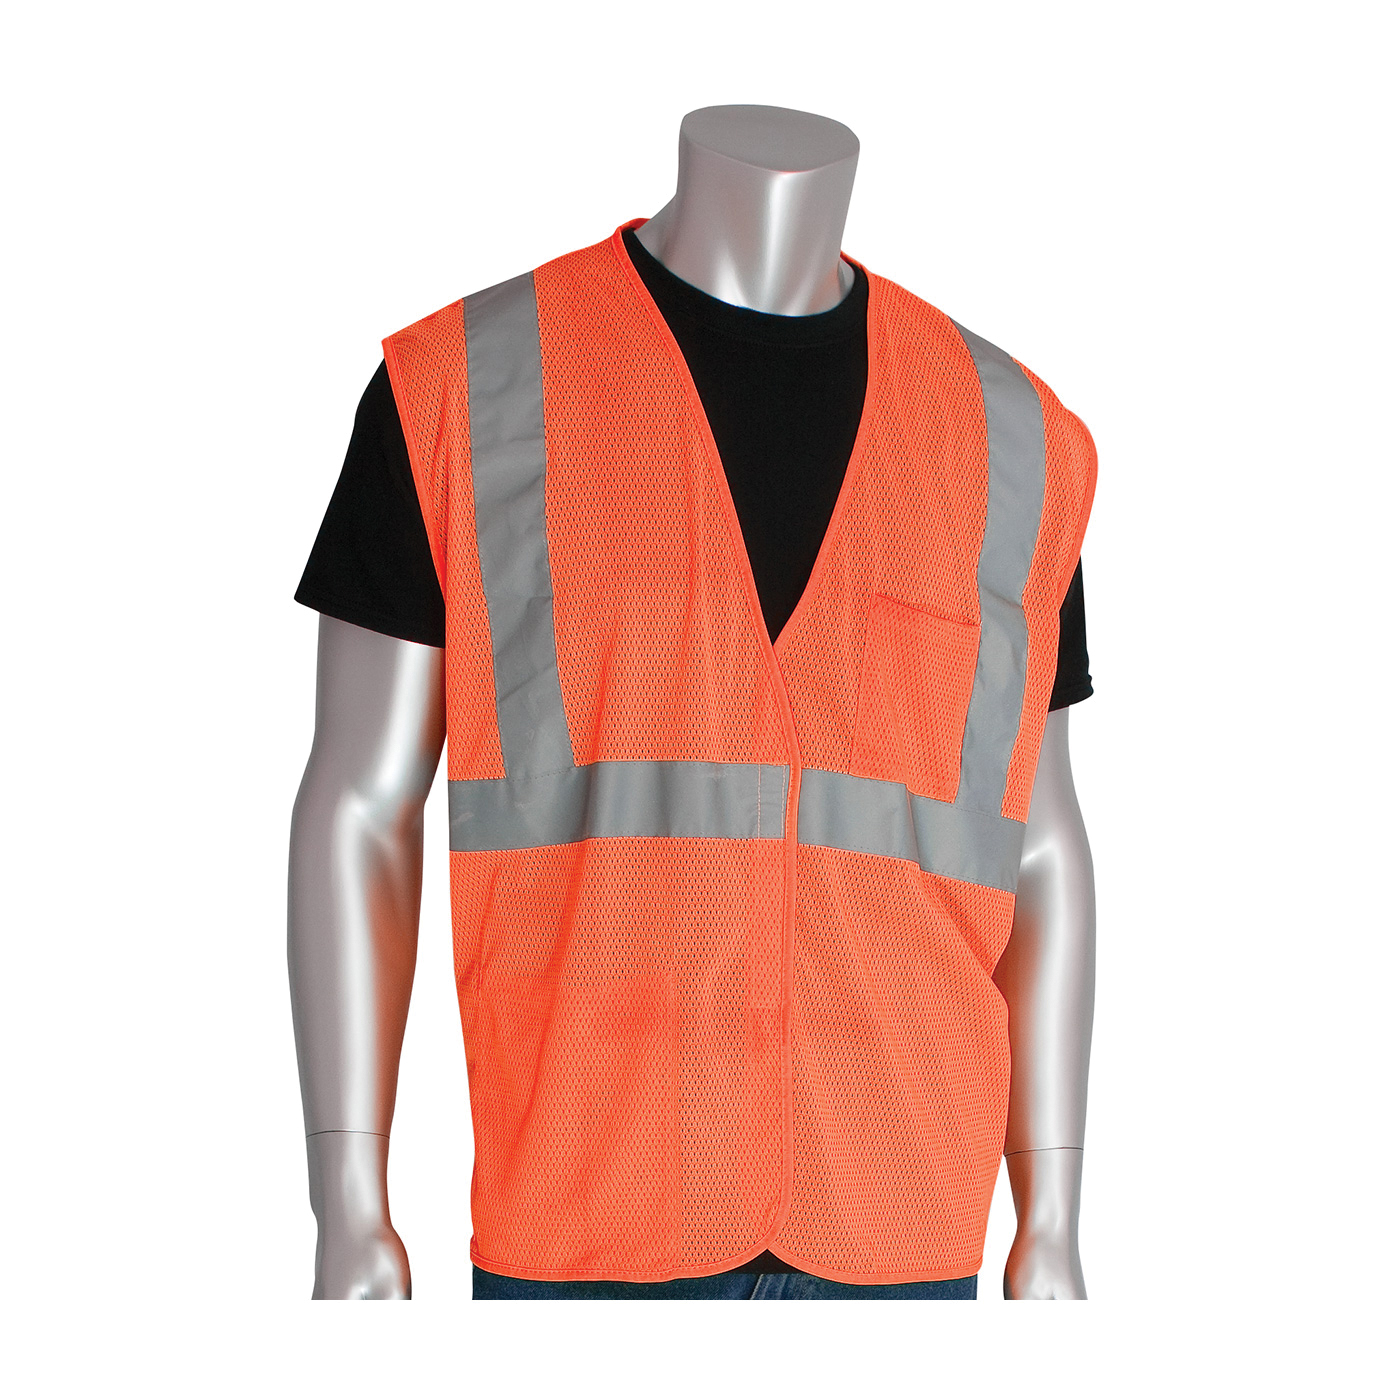 PIP® 302-0702-OR/M Safety Vest, M, Hi-Viz Orange, Polyester Mesh, Hook and Loop Closure, 2 Pockets, ANSI Class: Class 2, Specifications Met: ANSI 107 Type R